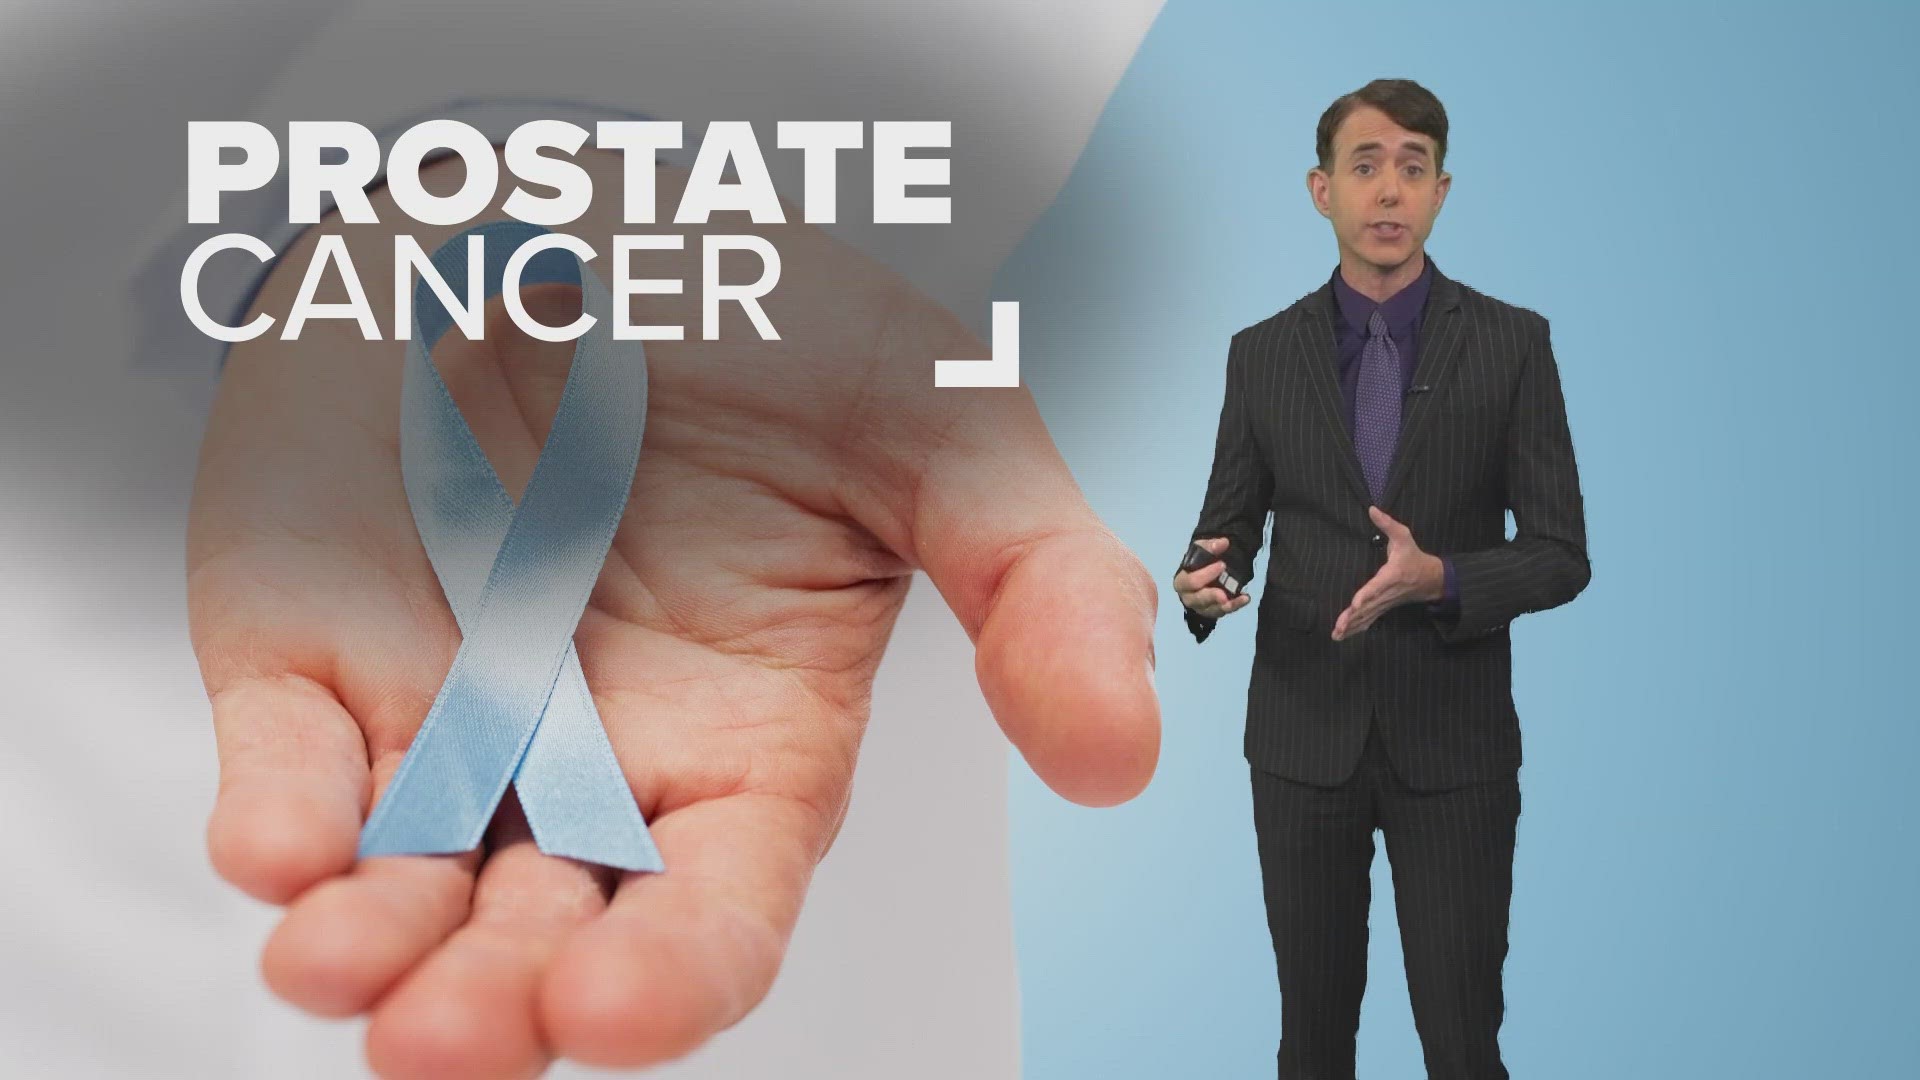 When caught early, prostate cancer is very treatable.